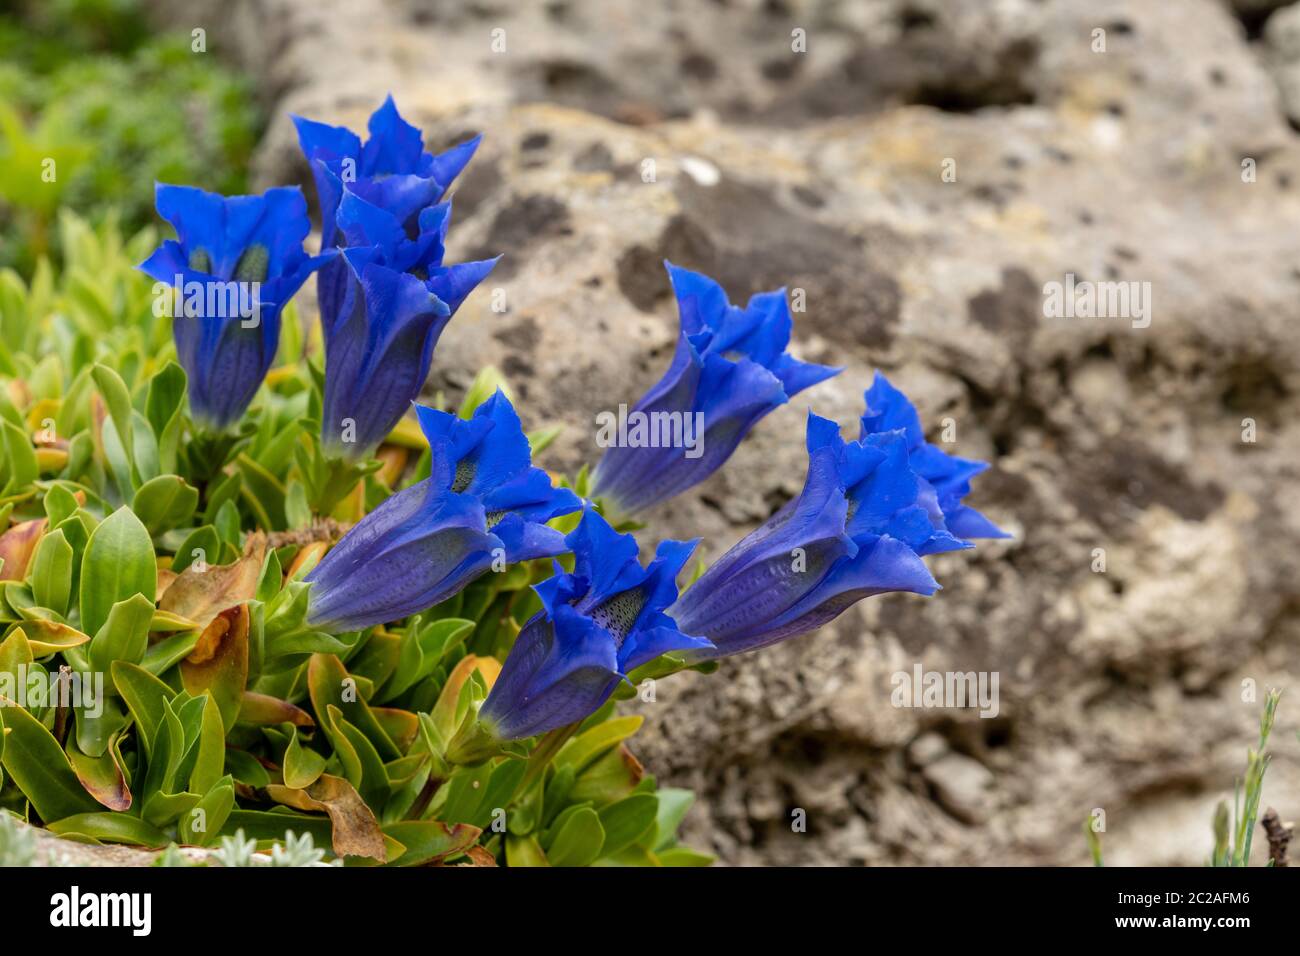 Blossoming Gentian Flowers Stock Photo